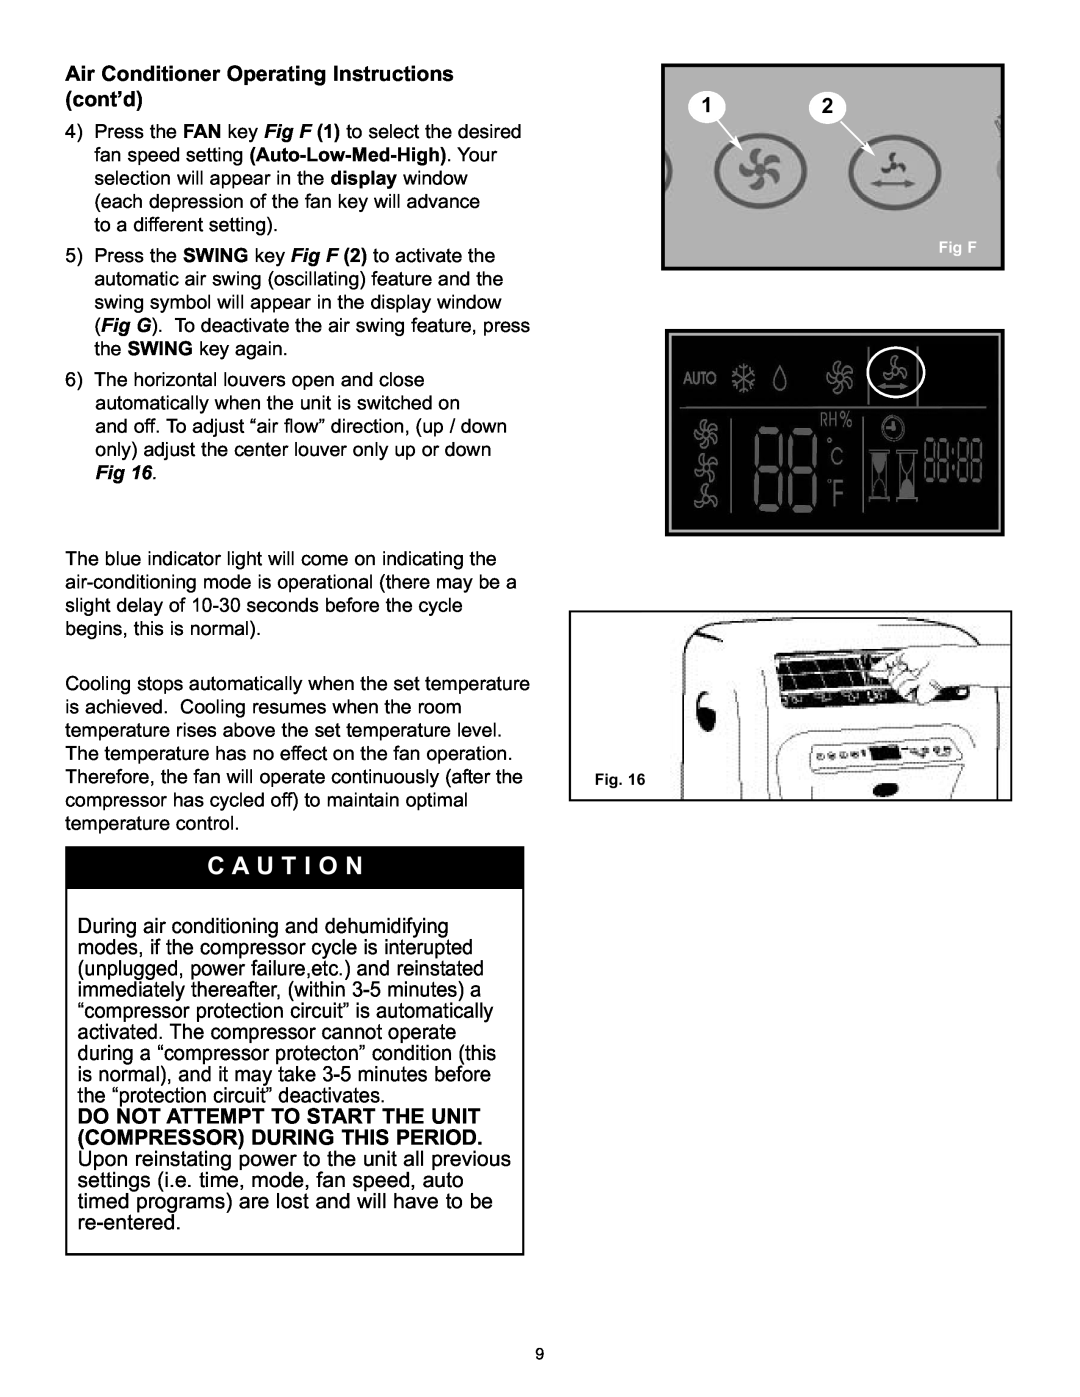 Danby DPAC120061 owner manual C A U T I O N During air, Air Conditioner Operating Instructions cont’d 